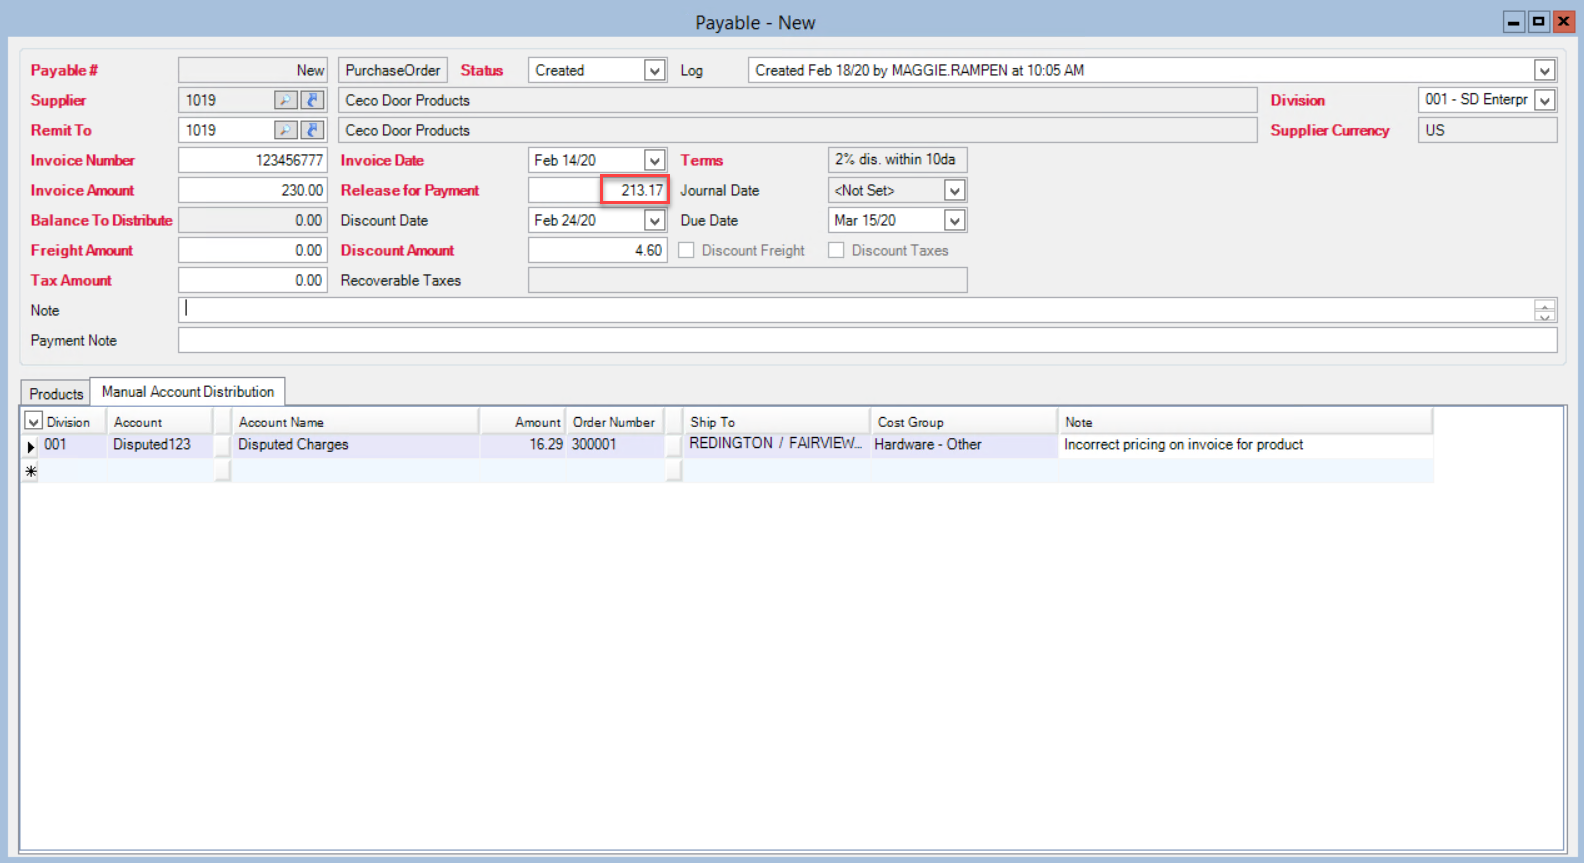 Payable window; shows Release for Payable Amount as lower than the Invoice Amount.